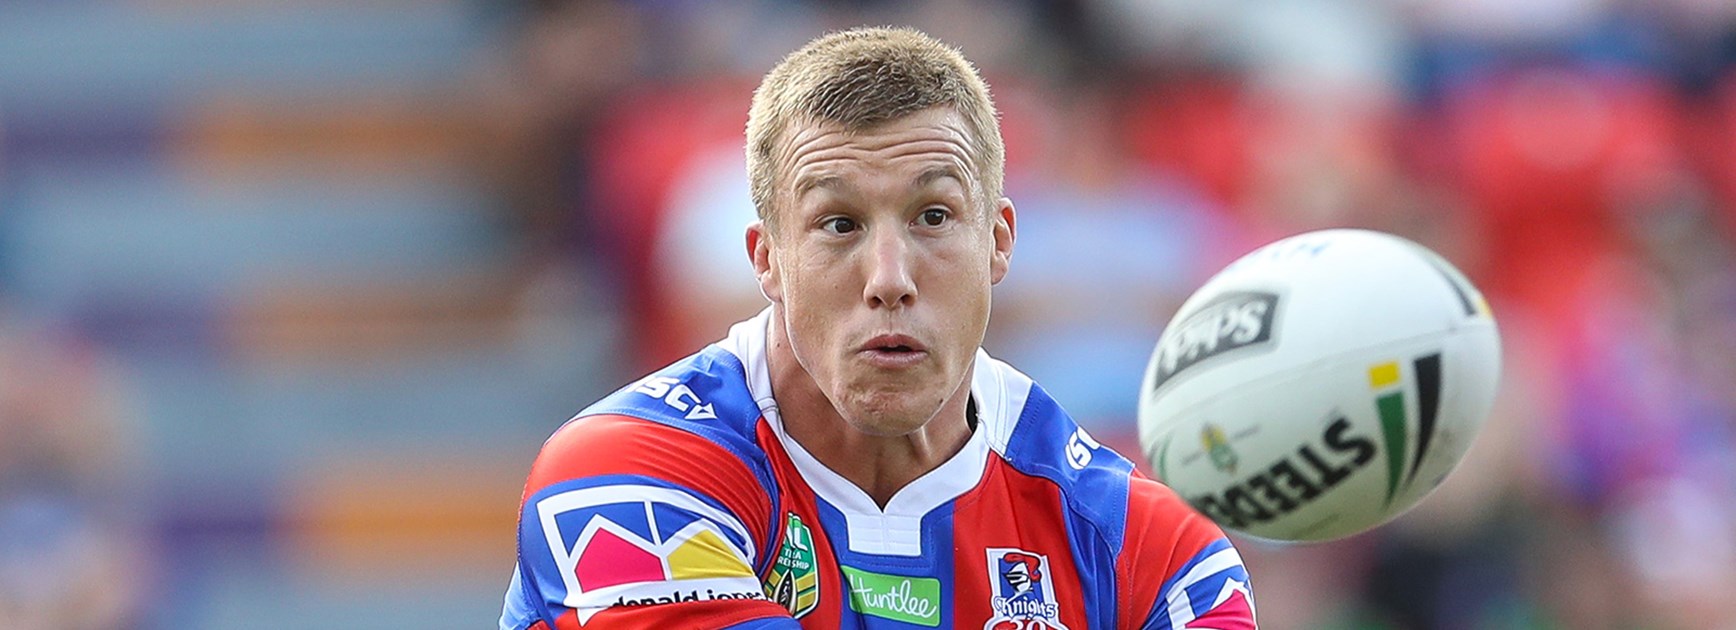 Newcastle Knights captain Trent Hodkinson in action against the Rabbitohs in Round 3.